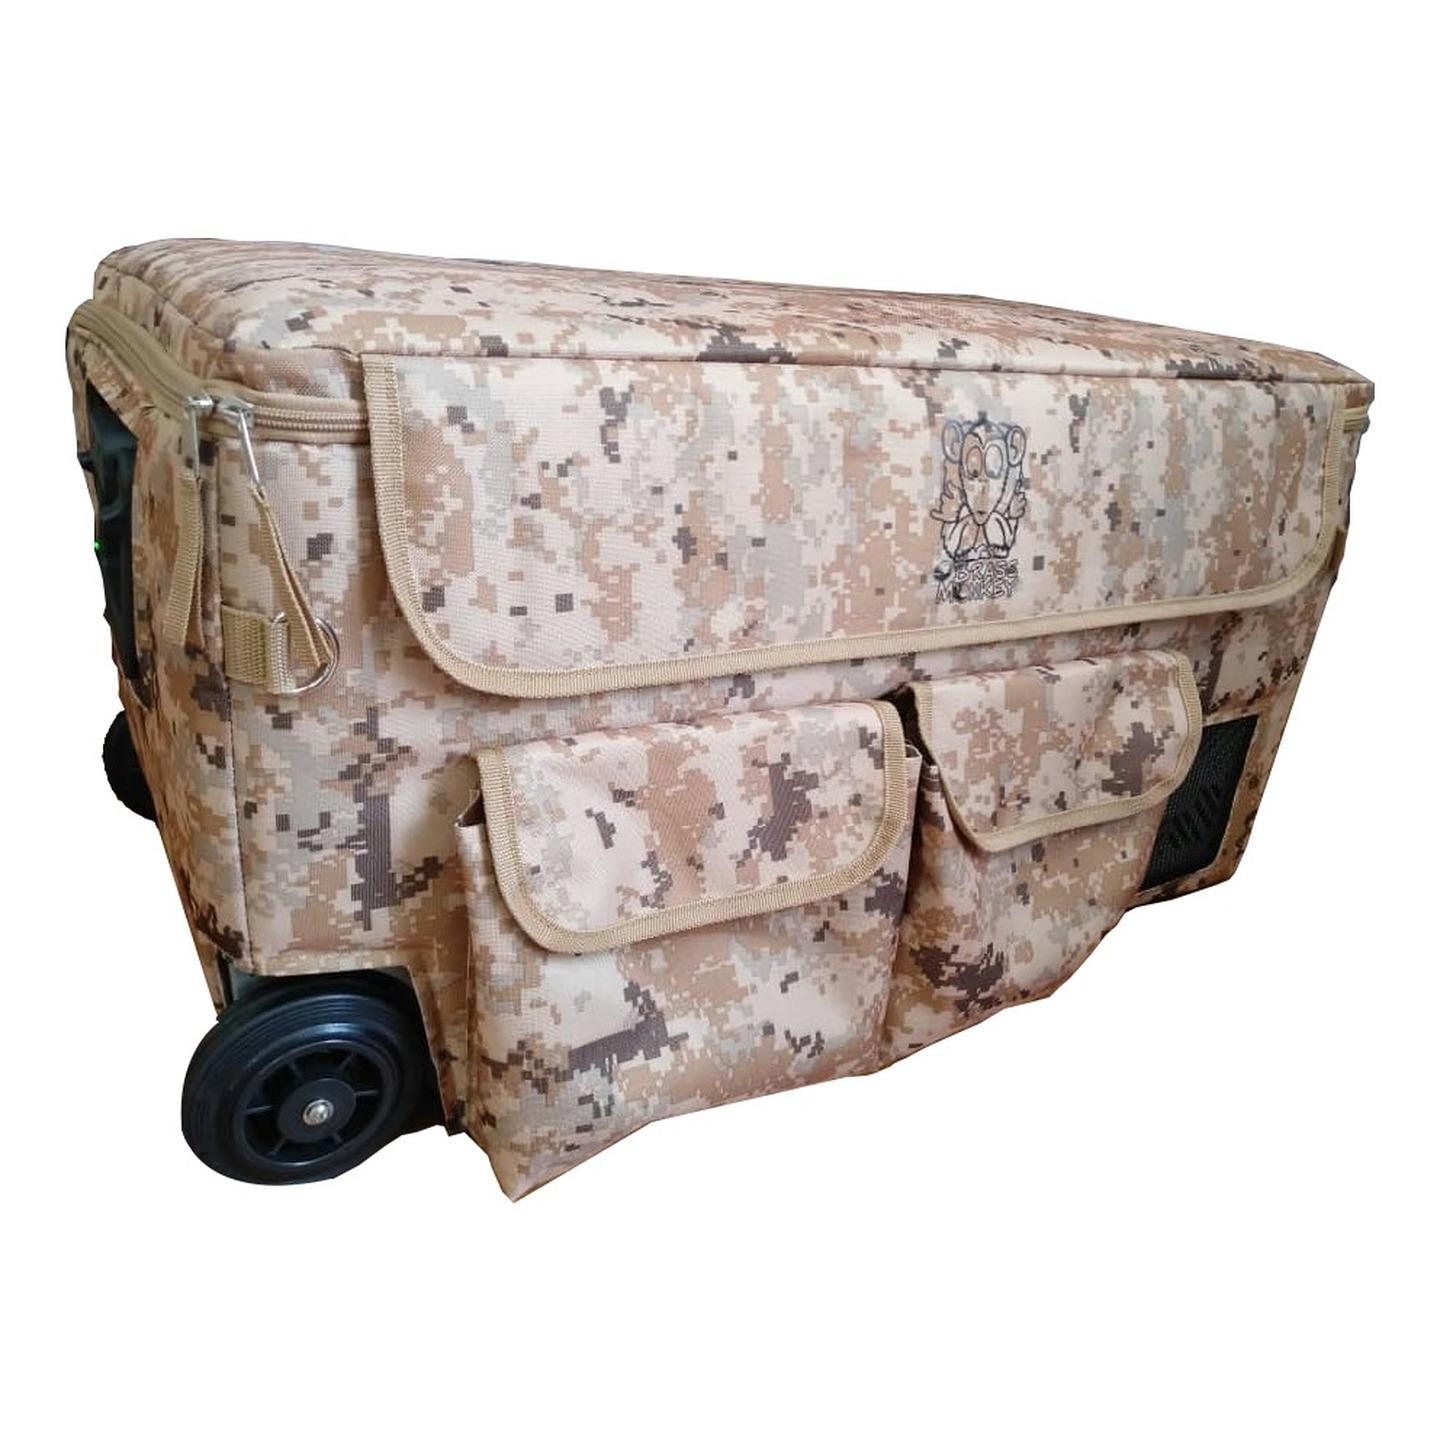 Camouflage Print Insulated Cover for 60L Brass Monkey Portable Fridge/Freezer